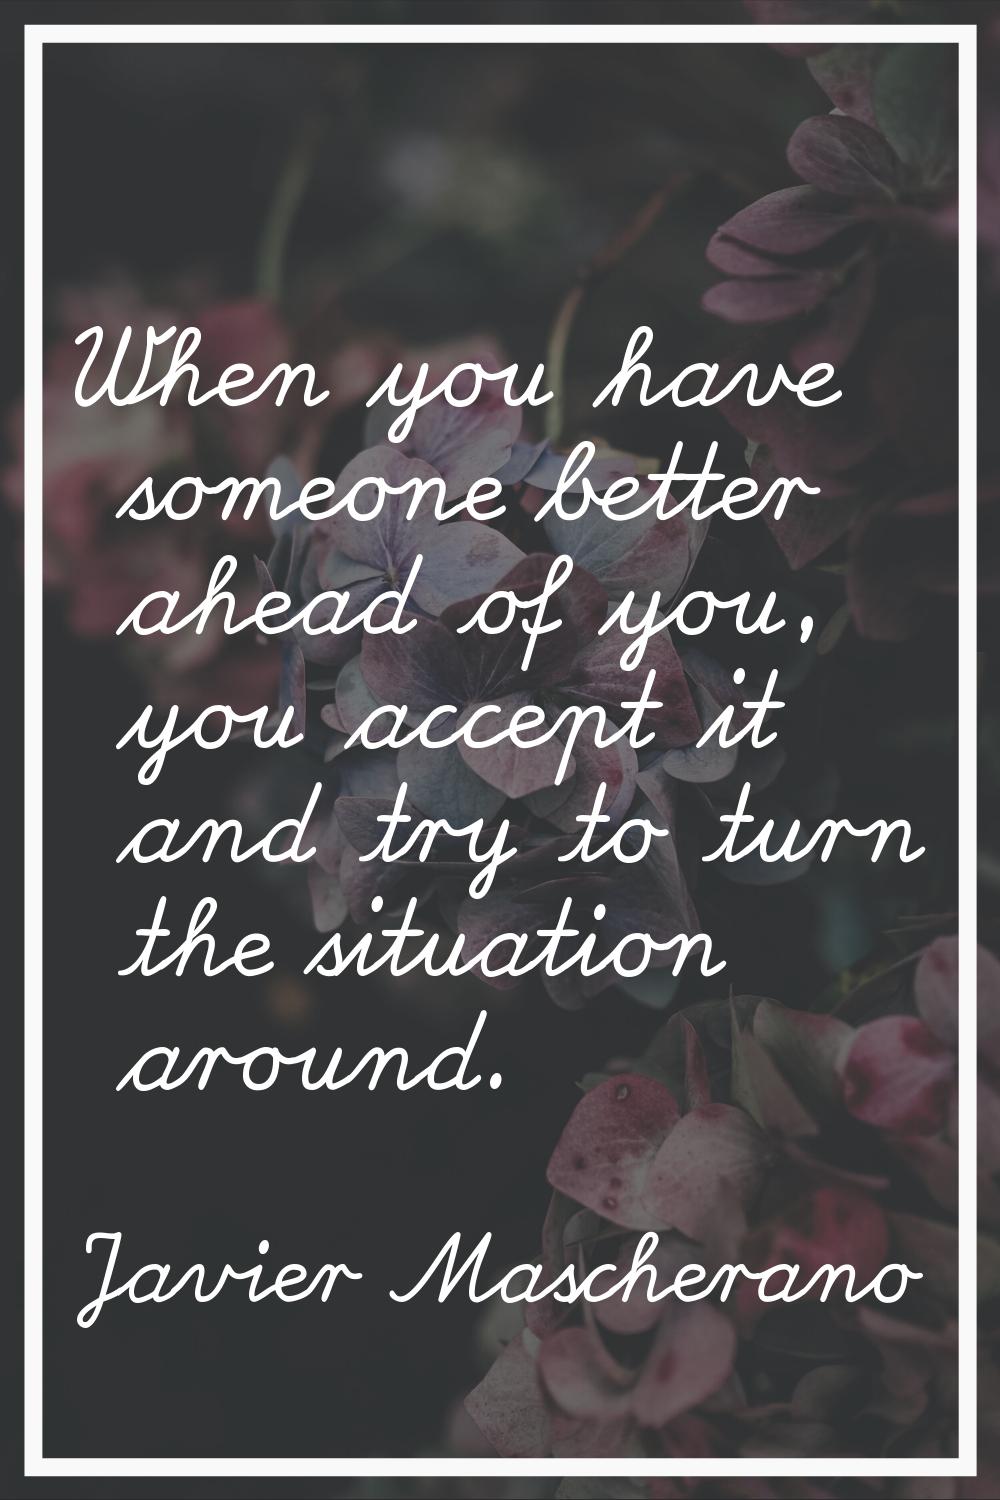 When you have someone better ahead of you, you accept it and try to turn the situation around.